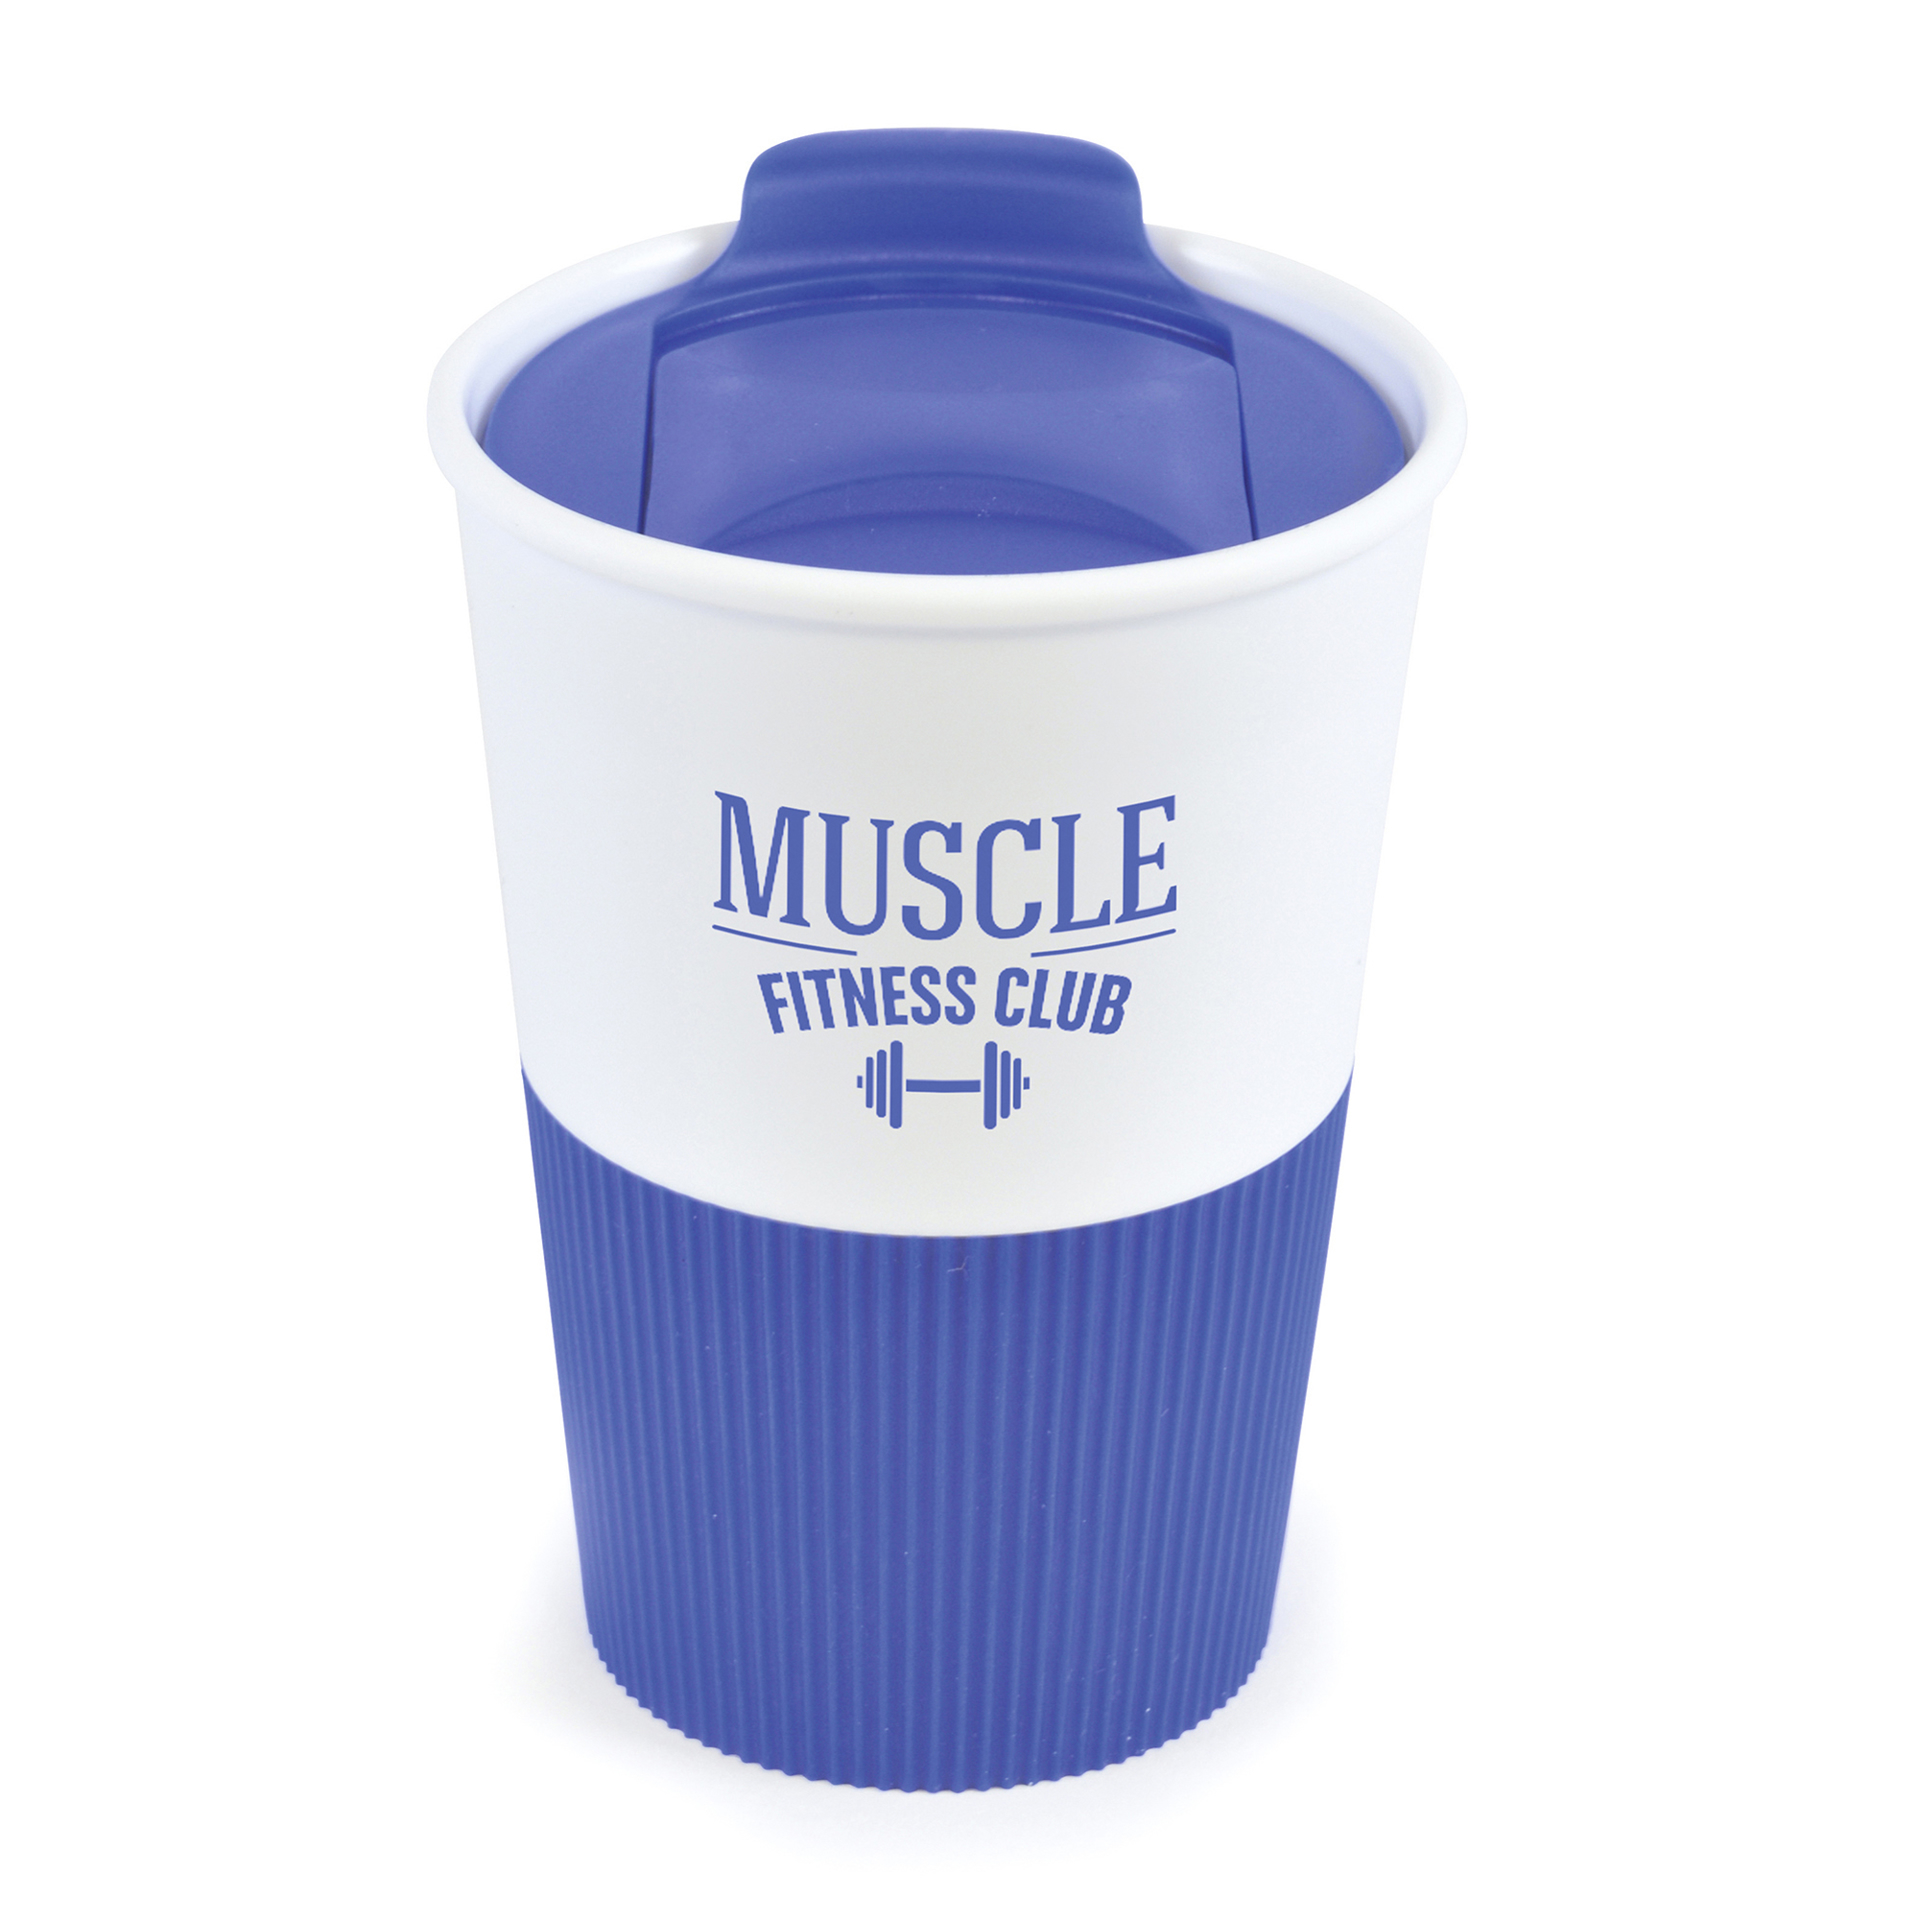 350ml double walled coffee cup in blue with white branding area